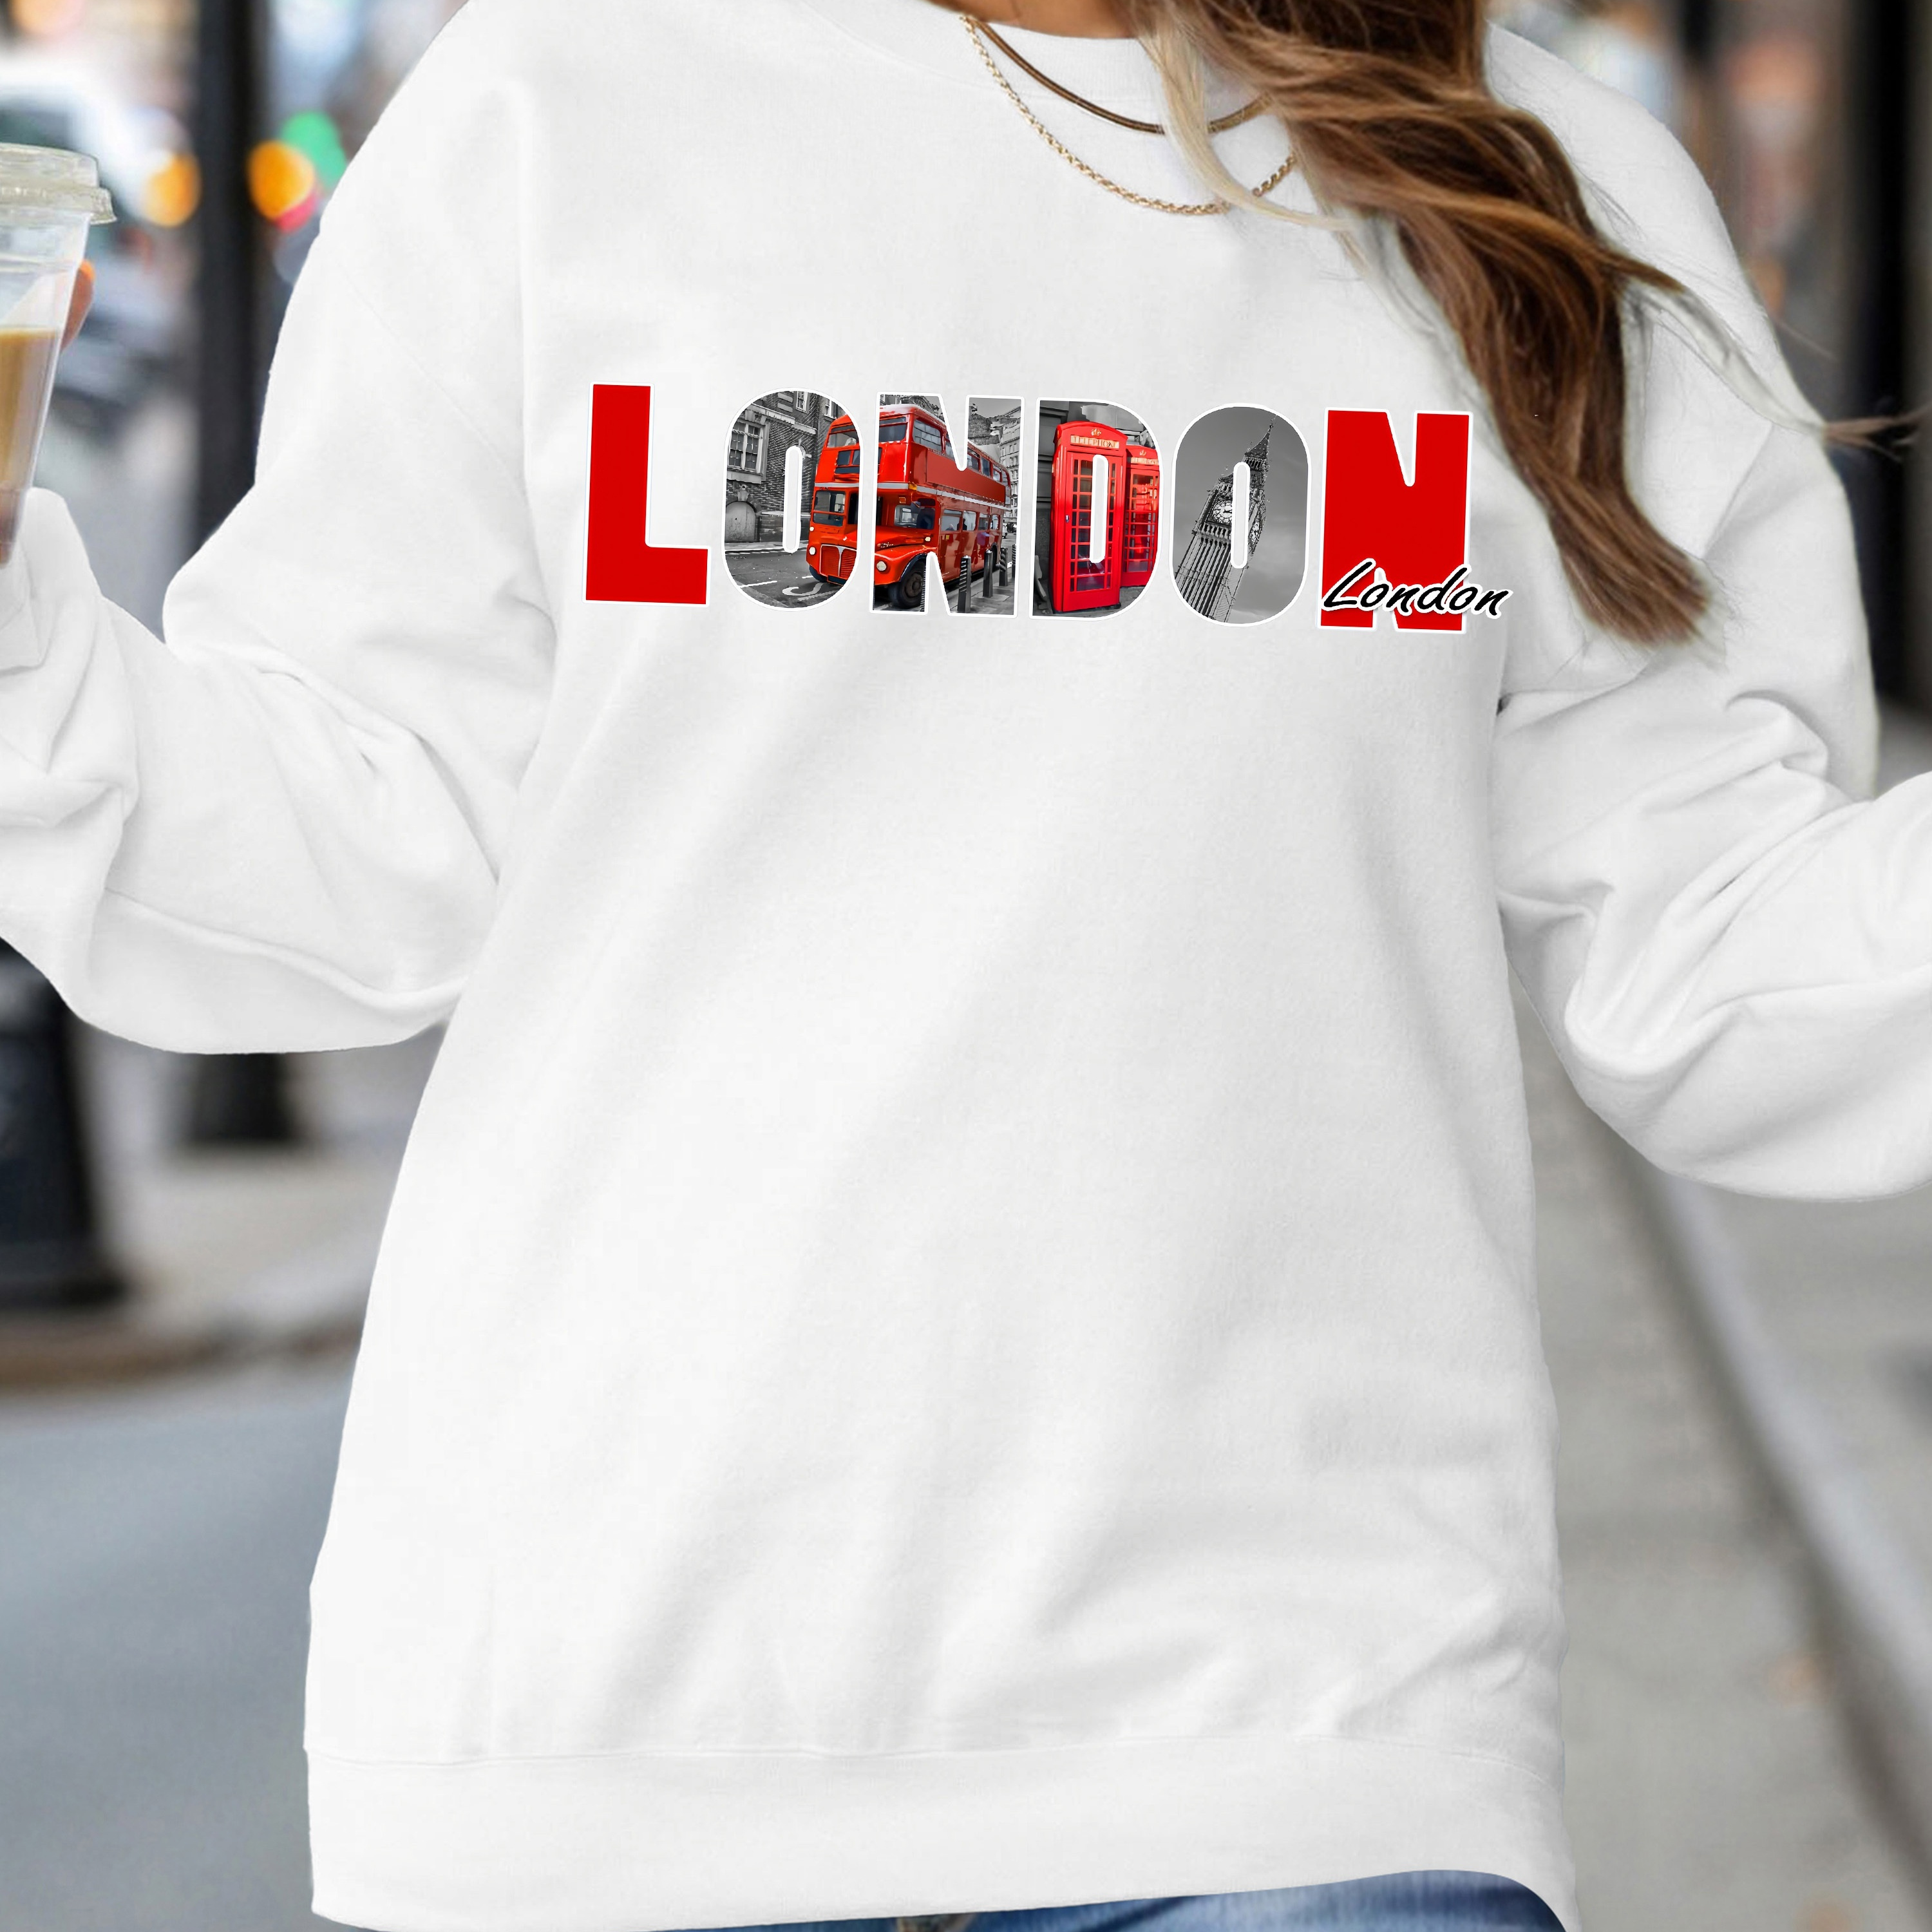 

London Print T-shirt, Casual Crew Neck Short Sleeve Top For Spring & Summer, Women's Clothing